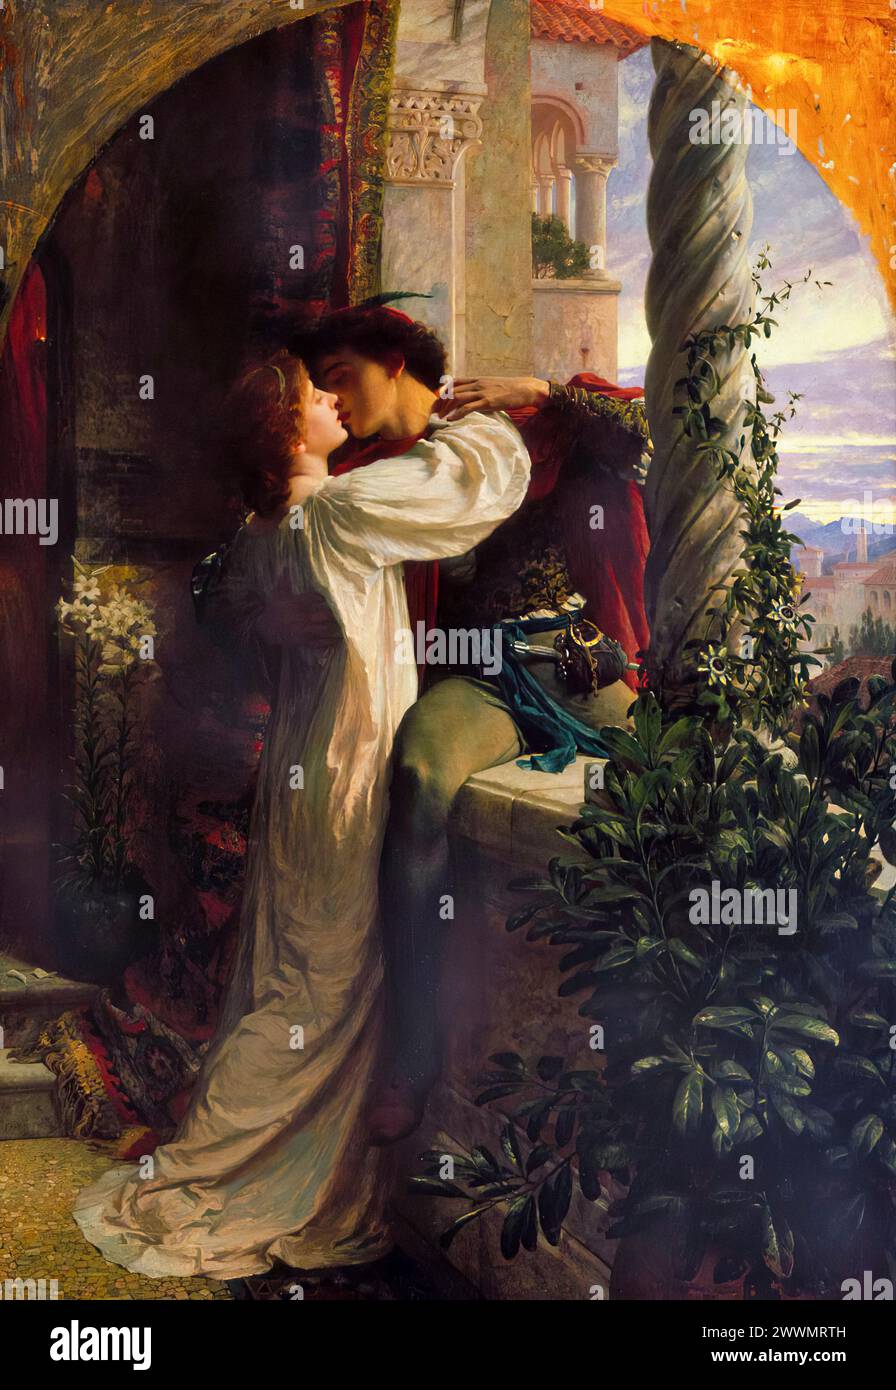 Romeo and Juliet, balcony scene, painting in oil on canvas by Frank Dicksee, 1884 Stock Photo